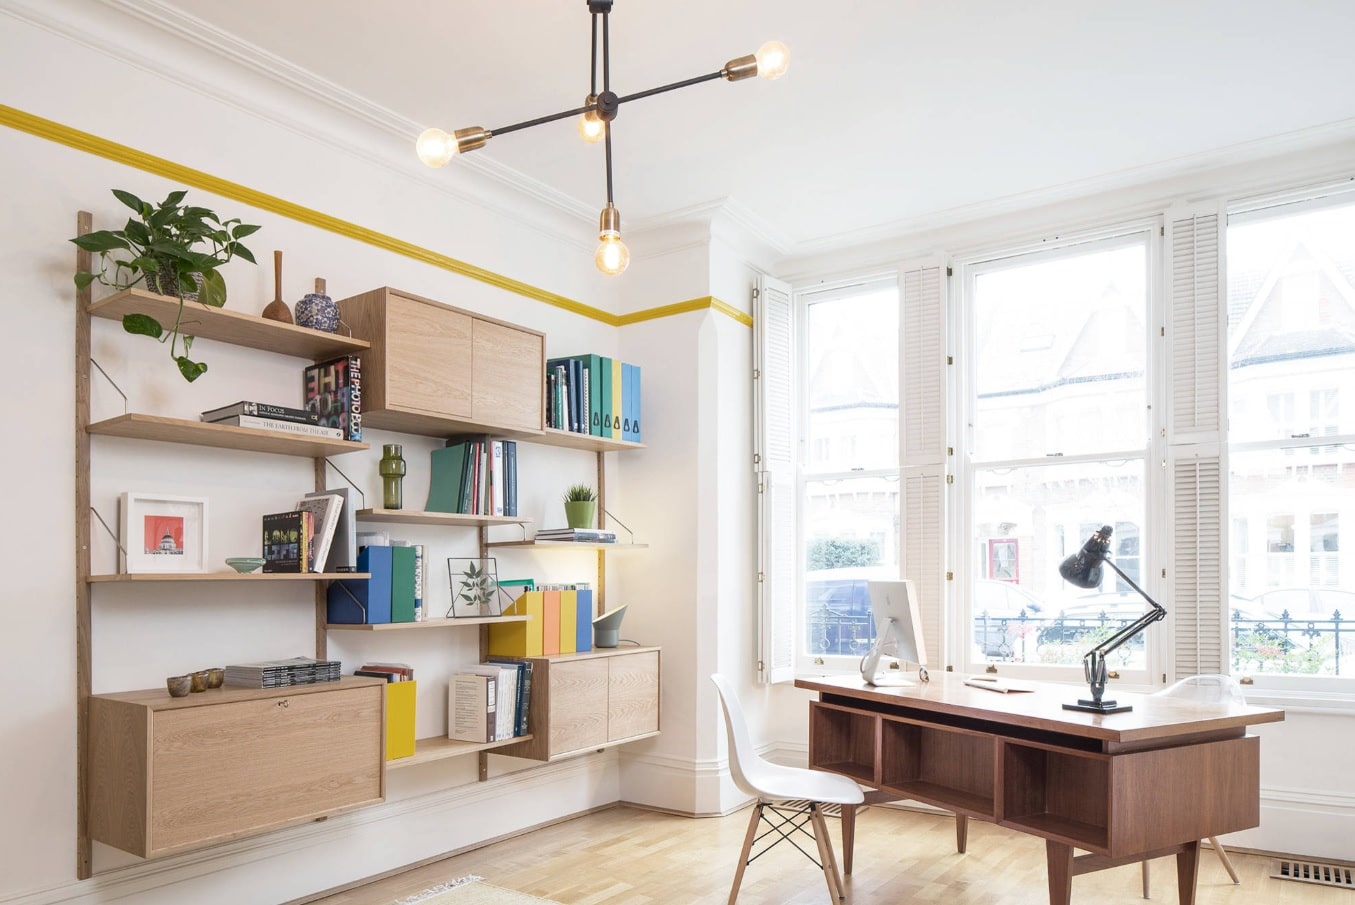 Power and Productivity: Home Office Decorating Ideas that Make Sense. Organized space